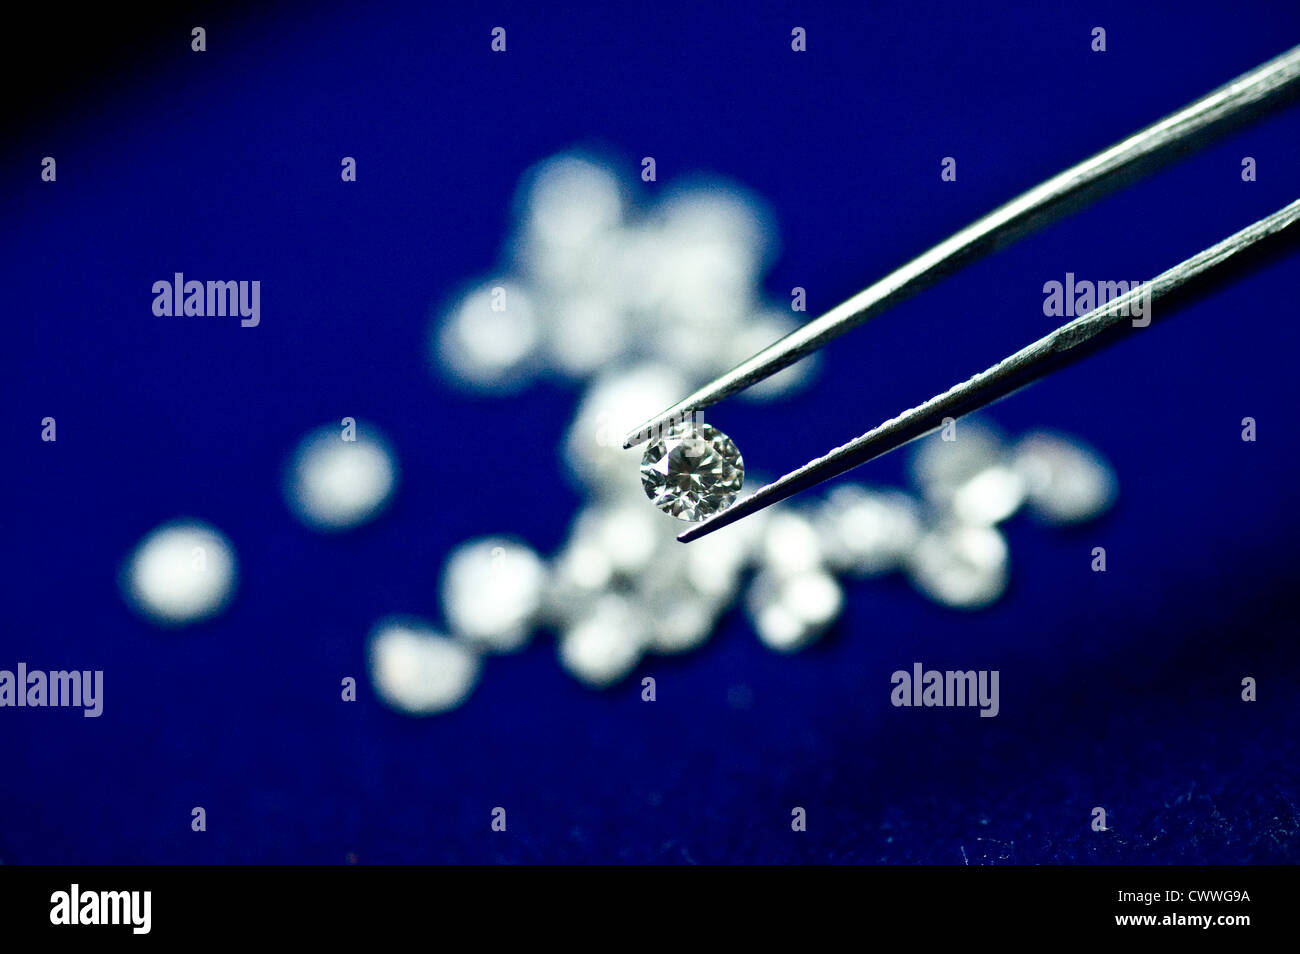 Cut and polished diamonds . They are DTC or Diamond Trading Company diamonds [ ie ethically sourced] originating from around the Stock Photo